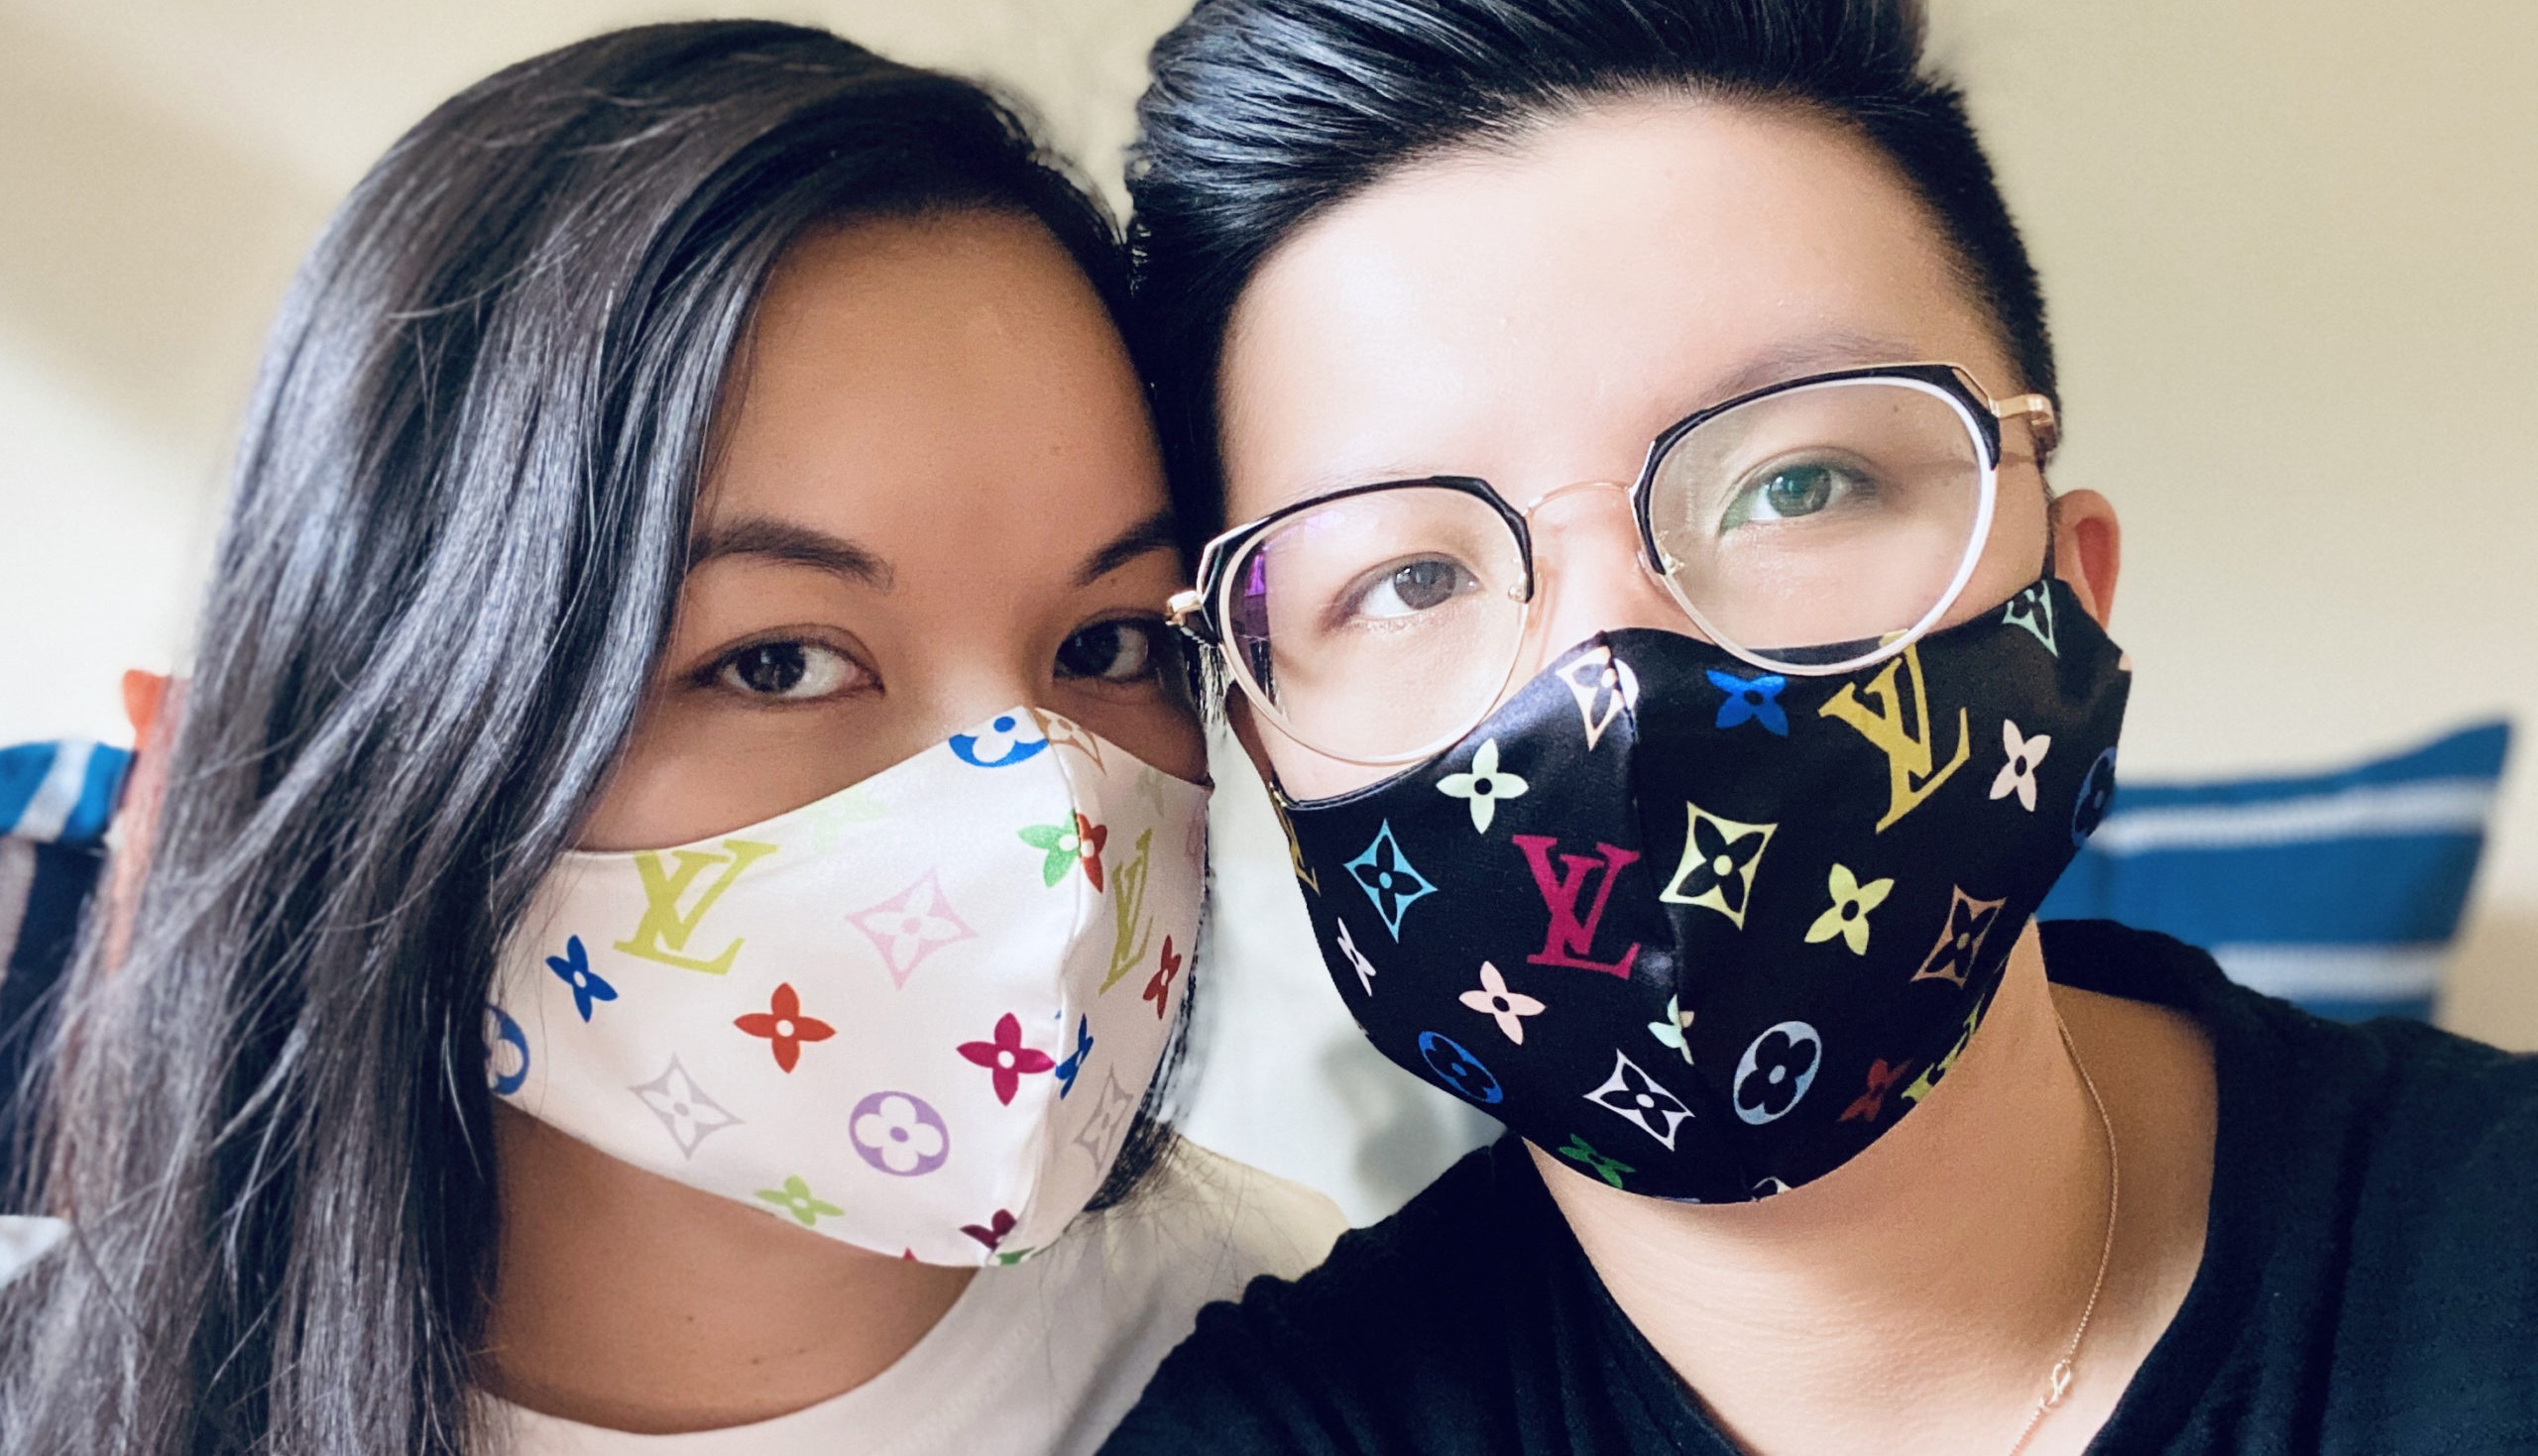 Local Trans Fashion Designer Sells Face Masks For Charity